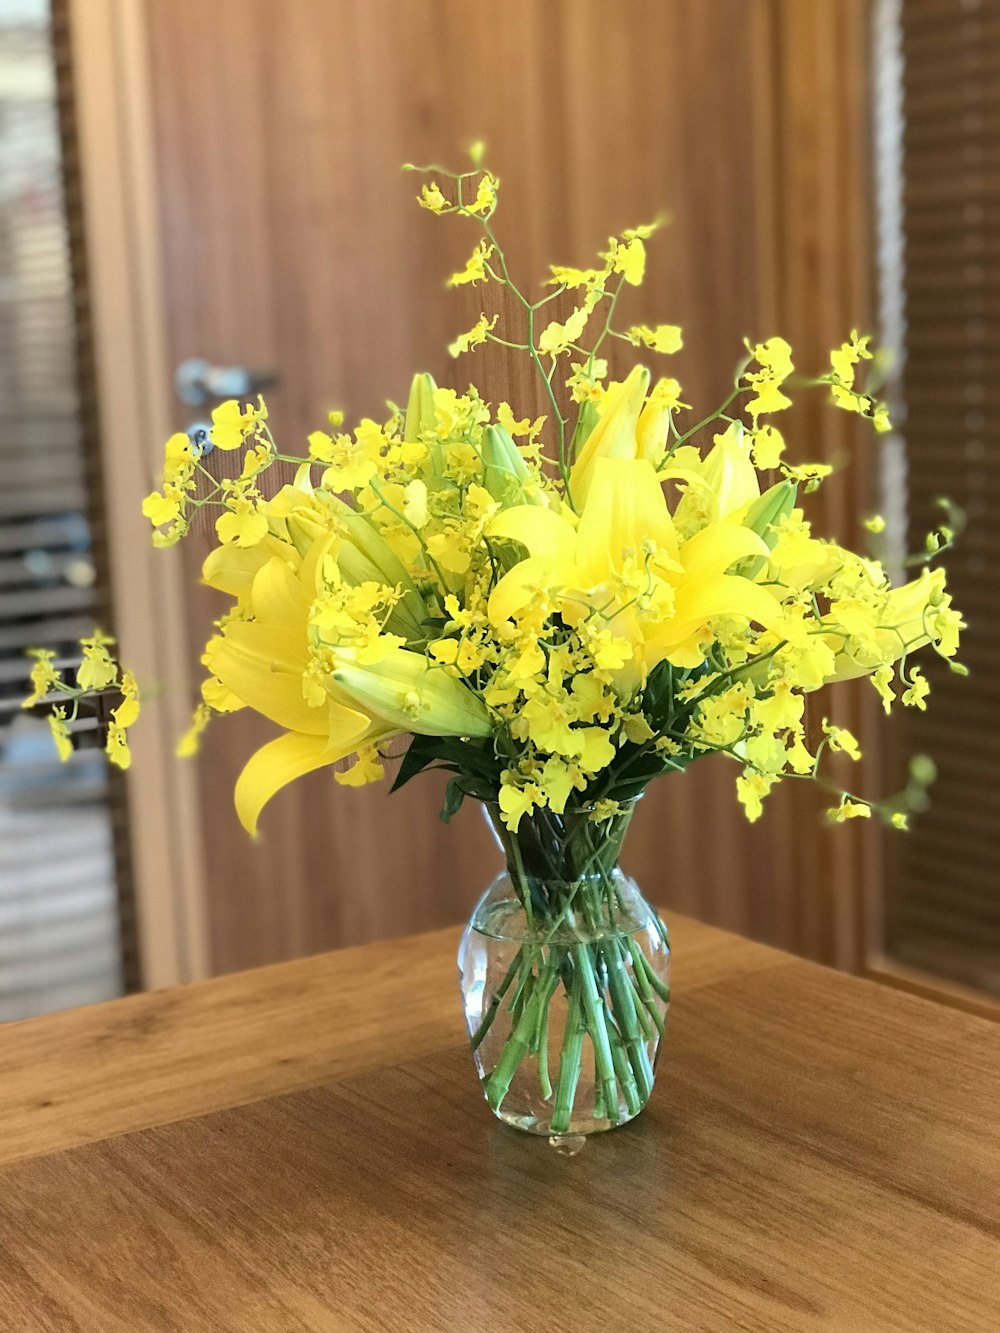 yellow petaled flower in glass vase on table